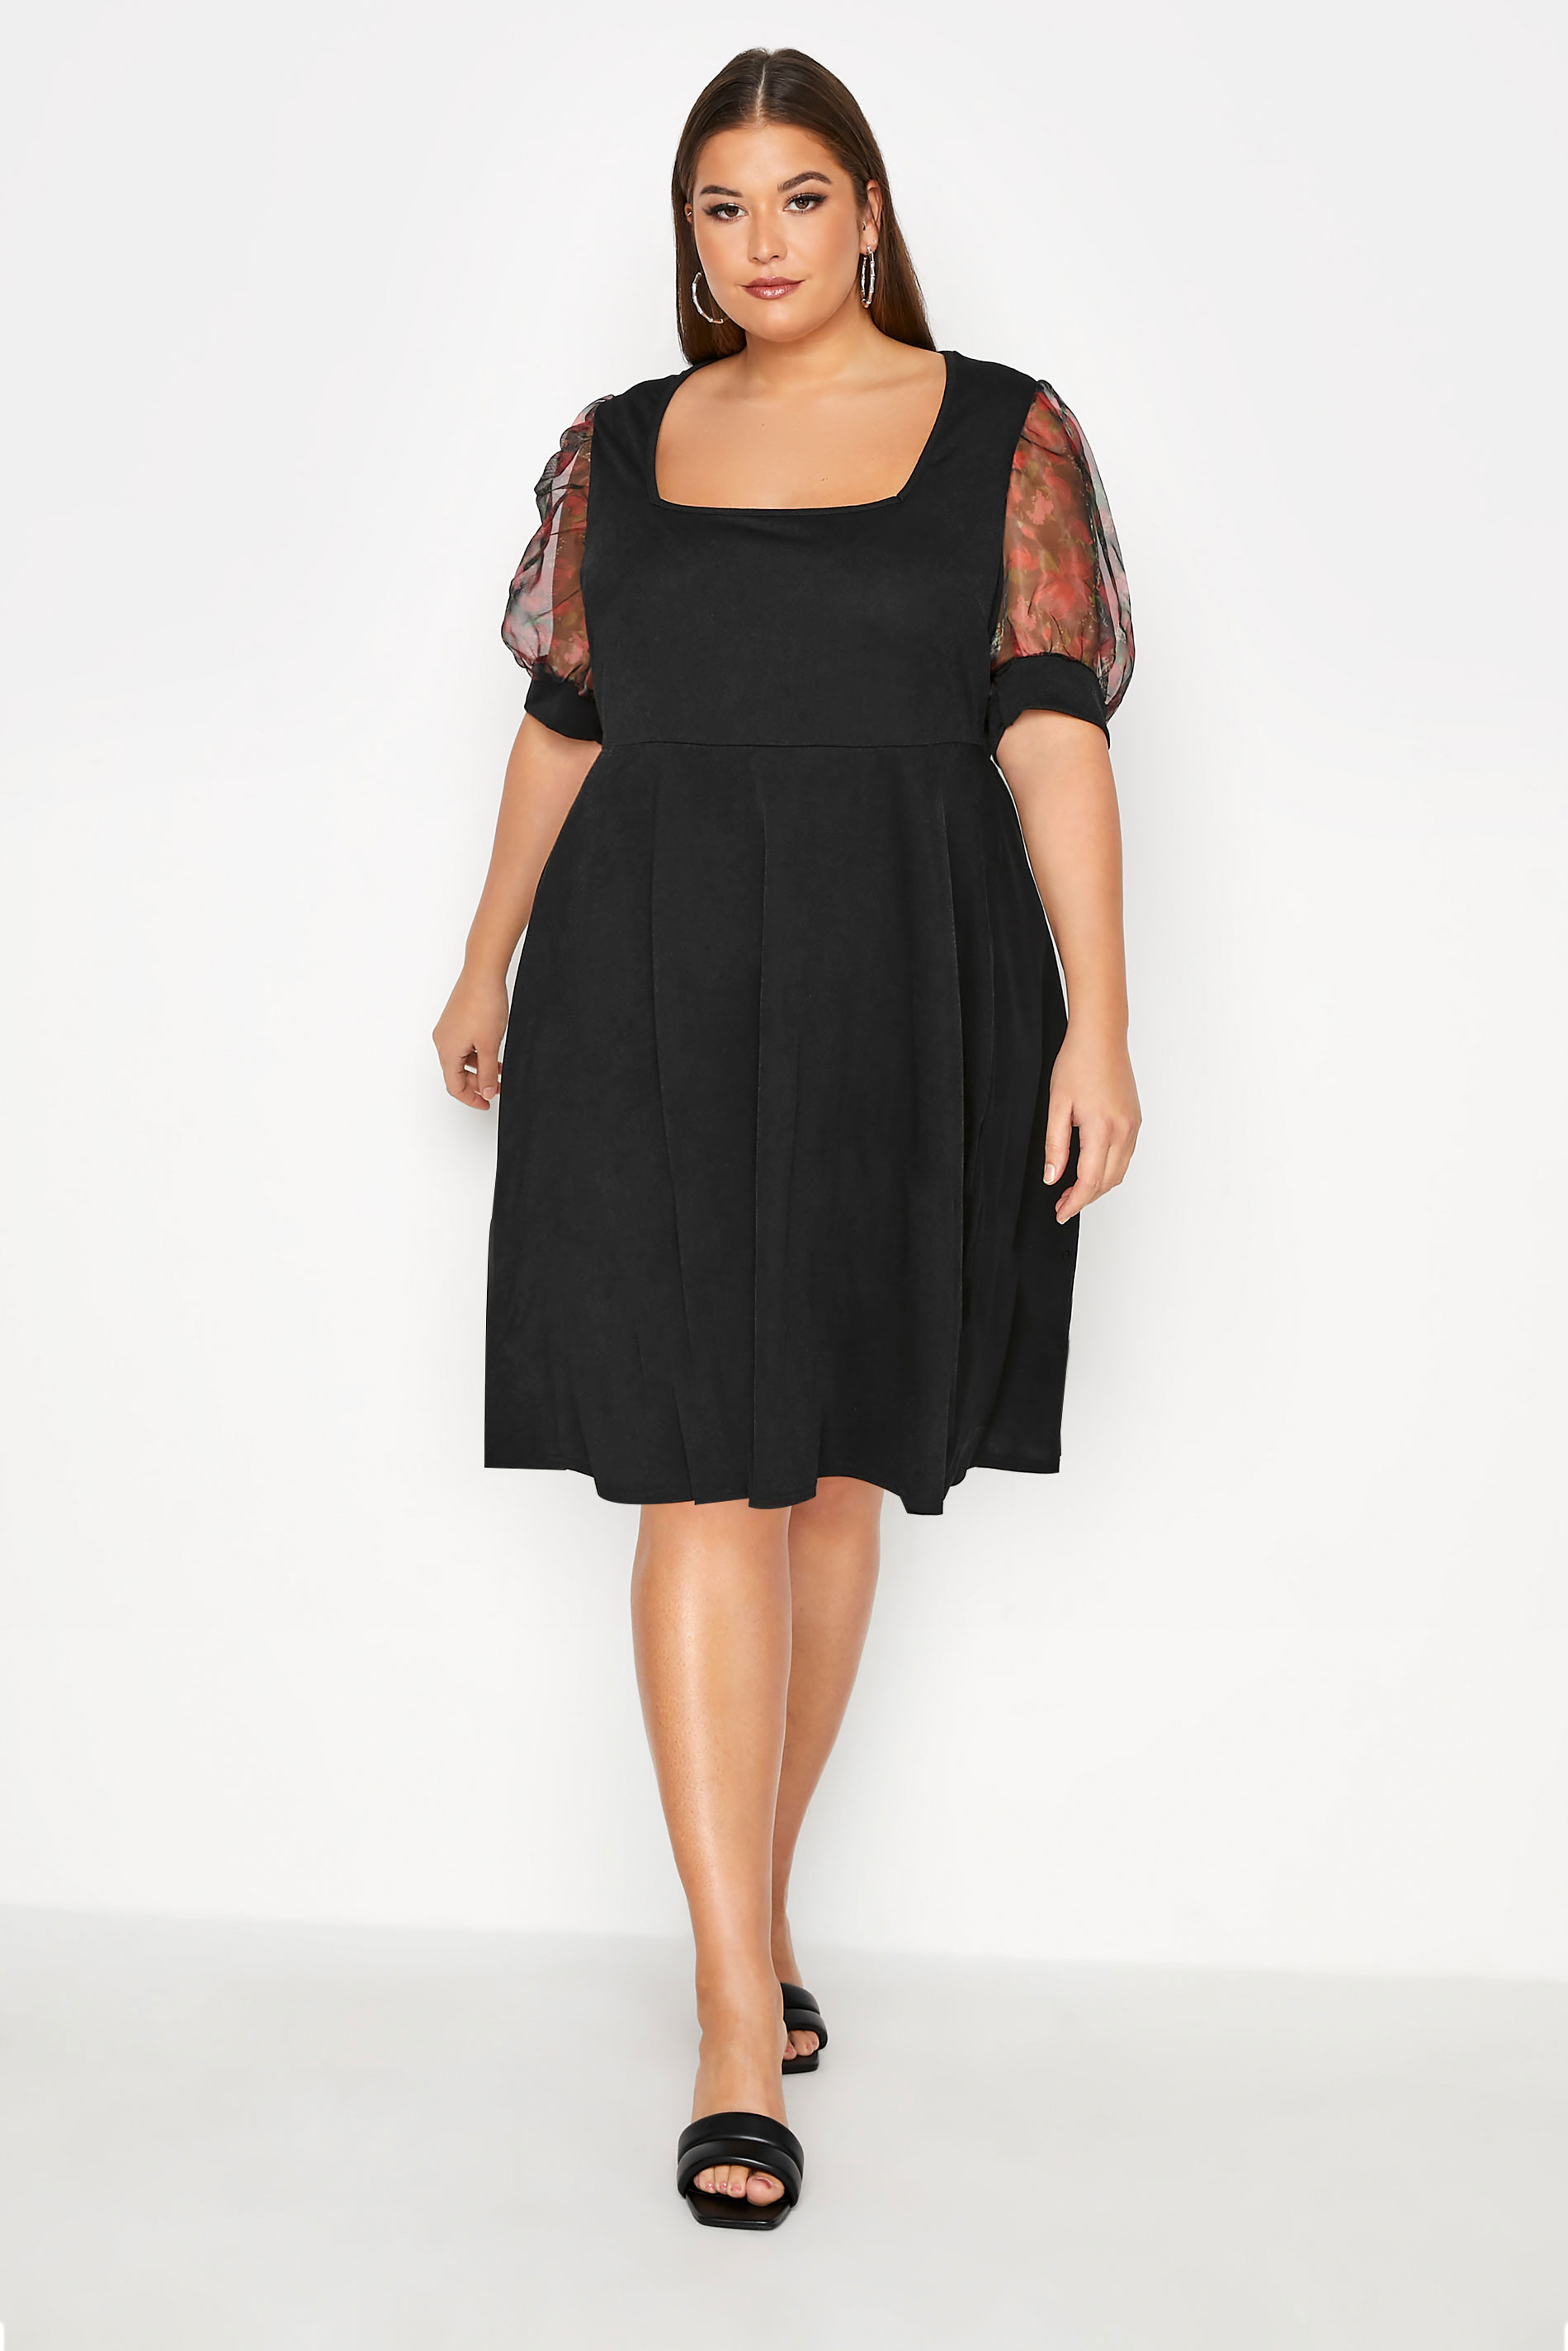 LIMITED COLLECTION Black Organza Puff Sleeve Skater Dress_A1..jpg